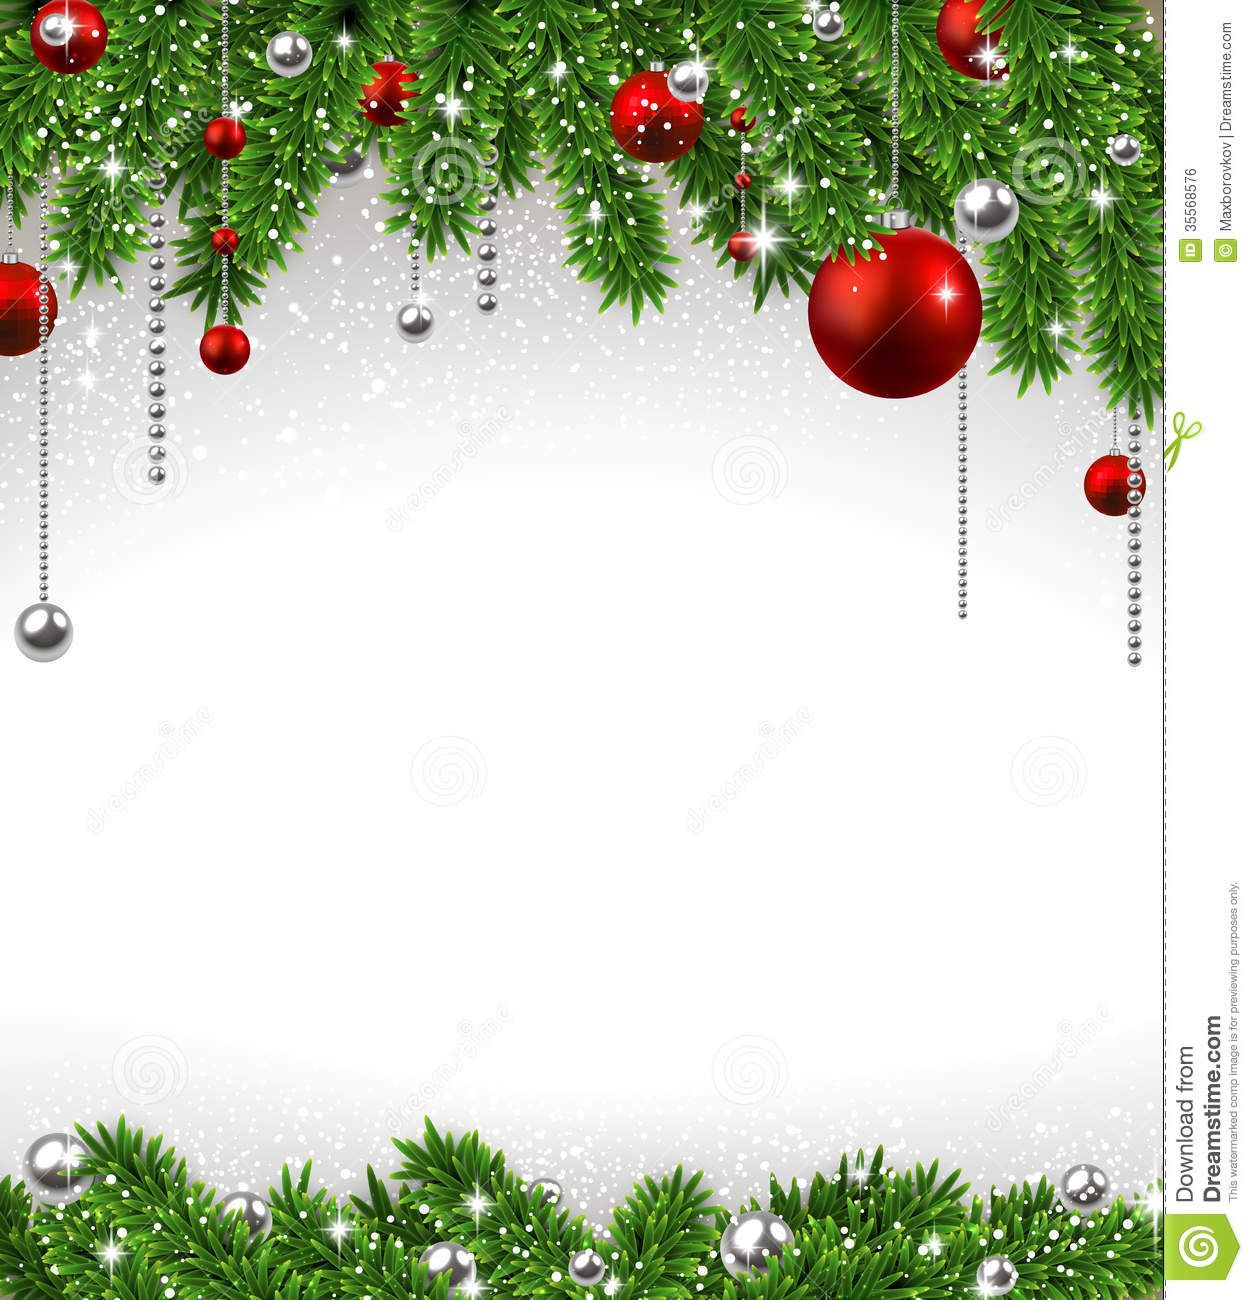 Christmas Background With Fir Branches And Balls Royalty Free